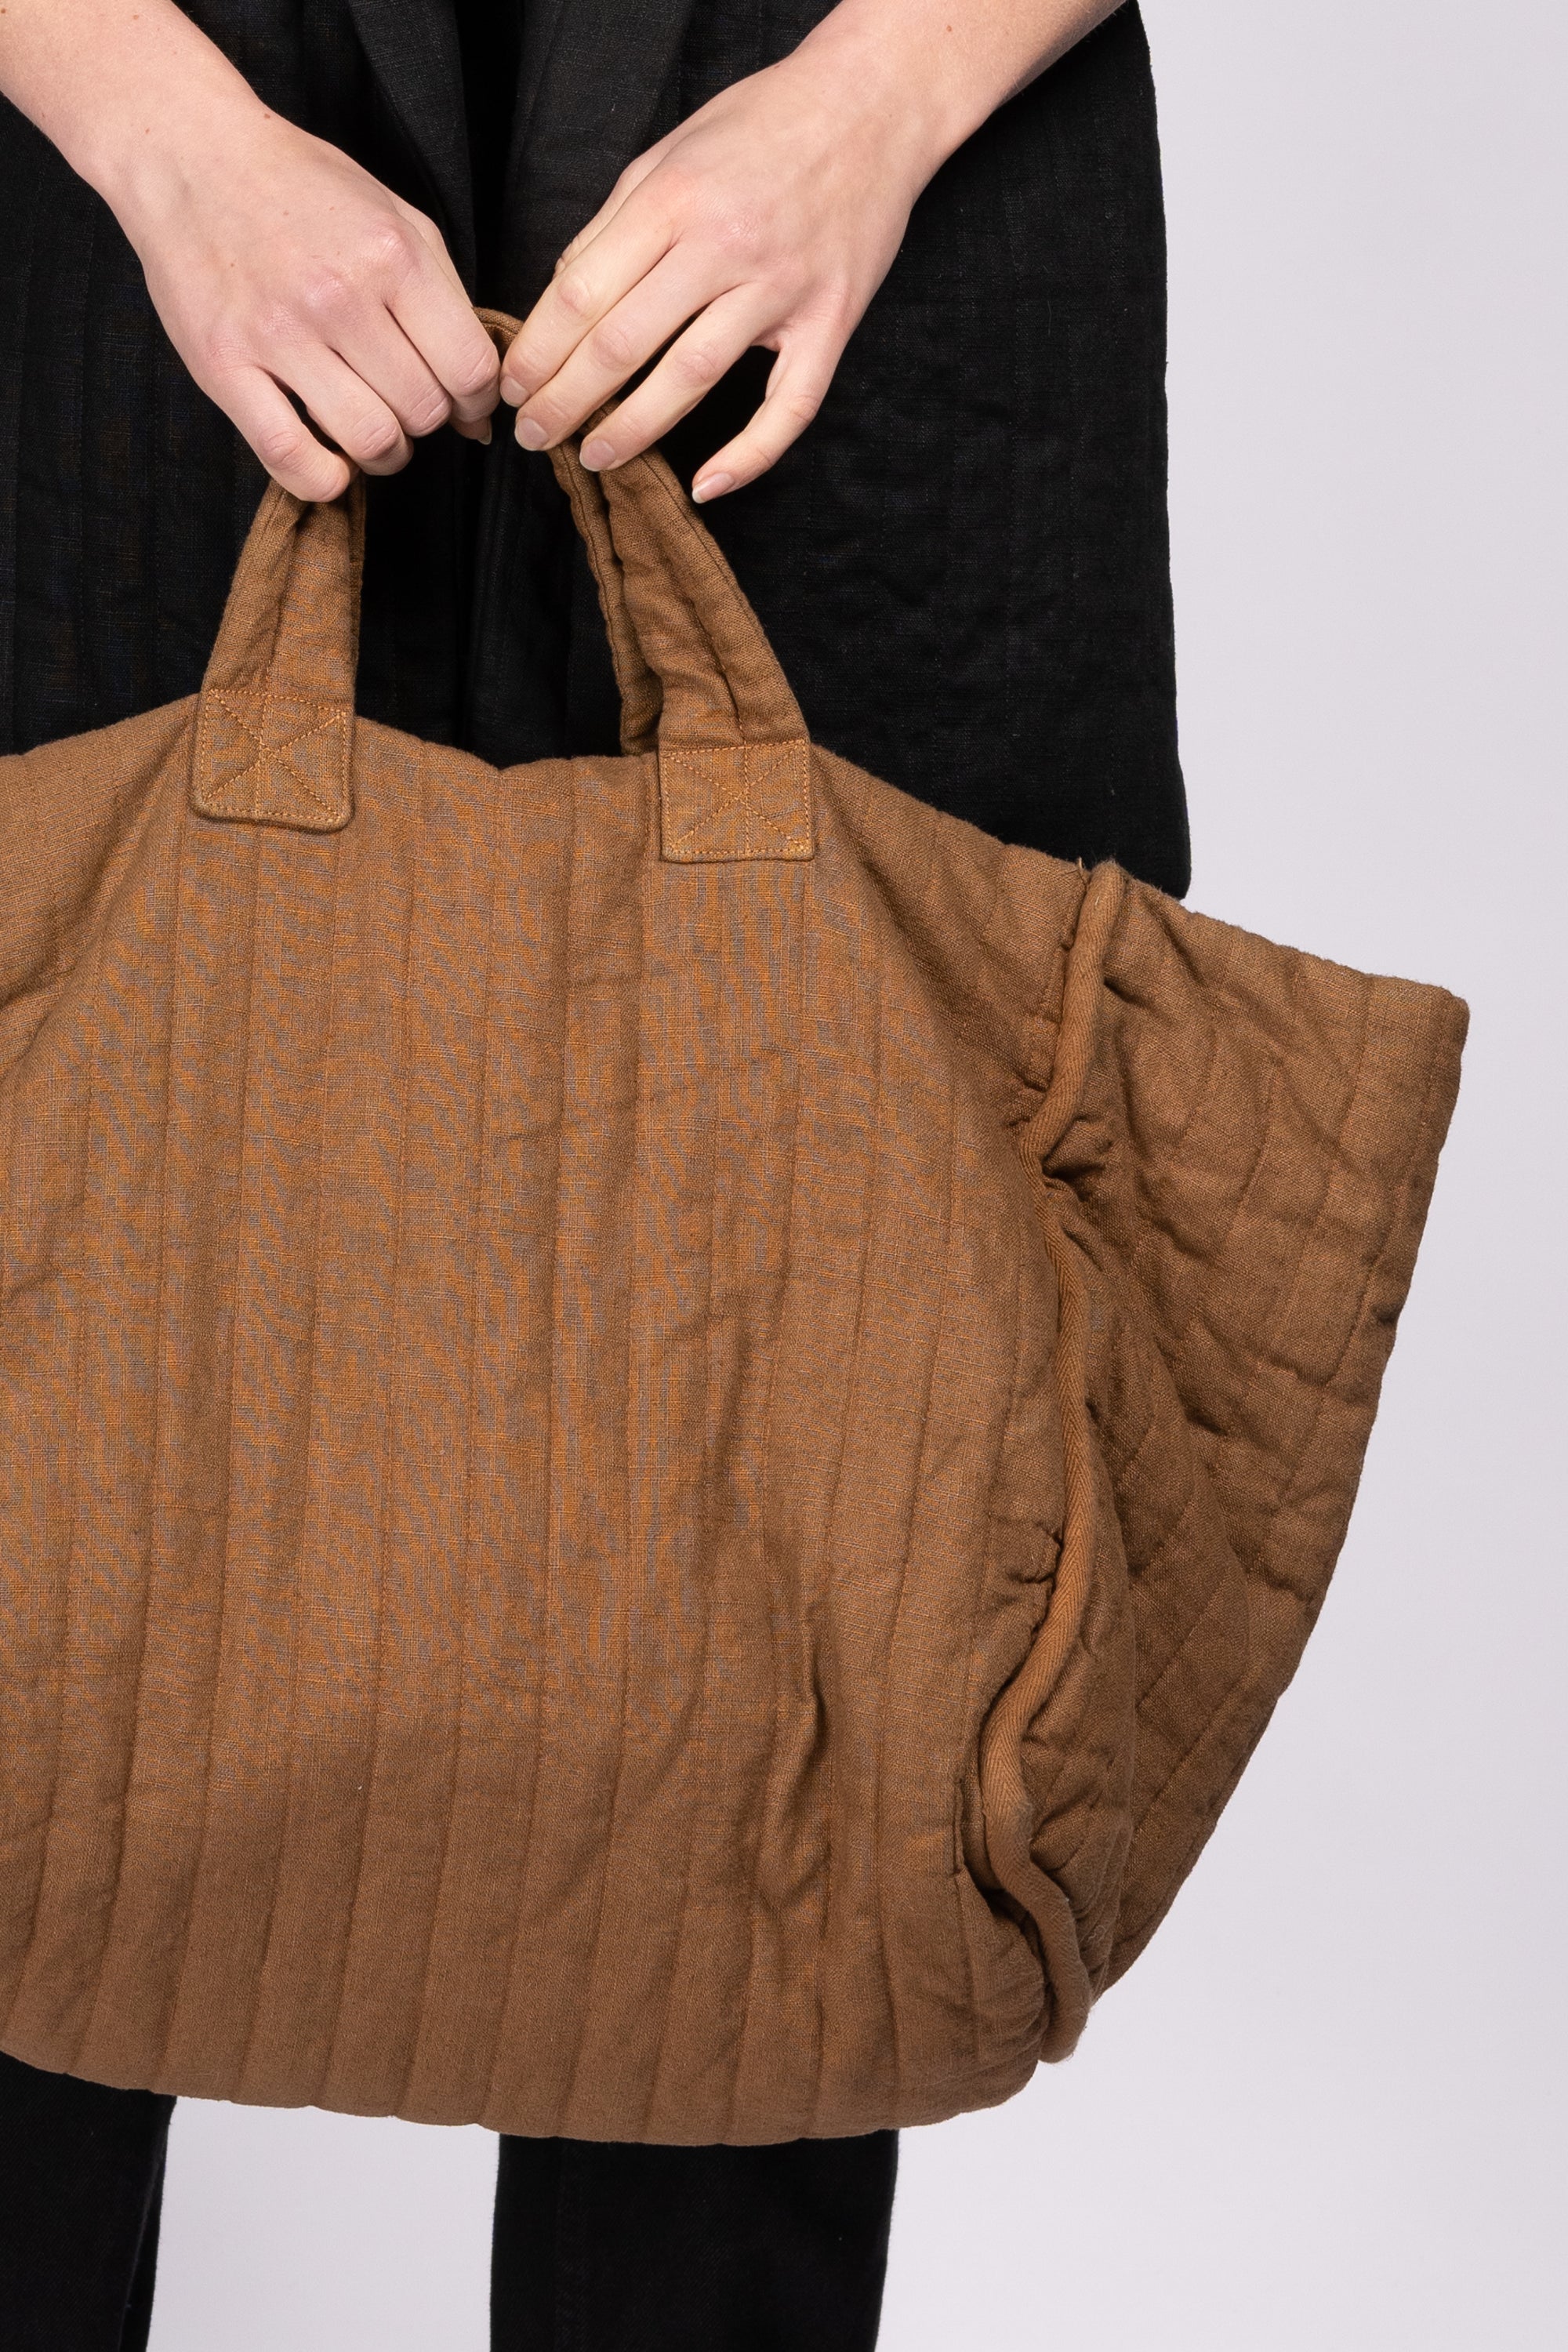 Quilty Tote - Wholewheat Linen